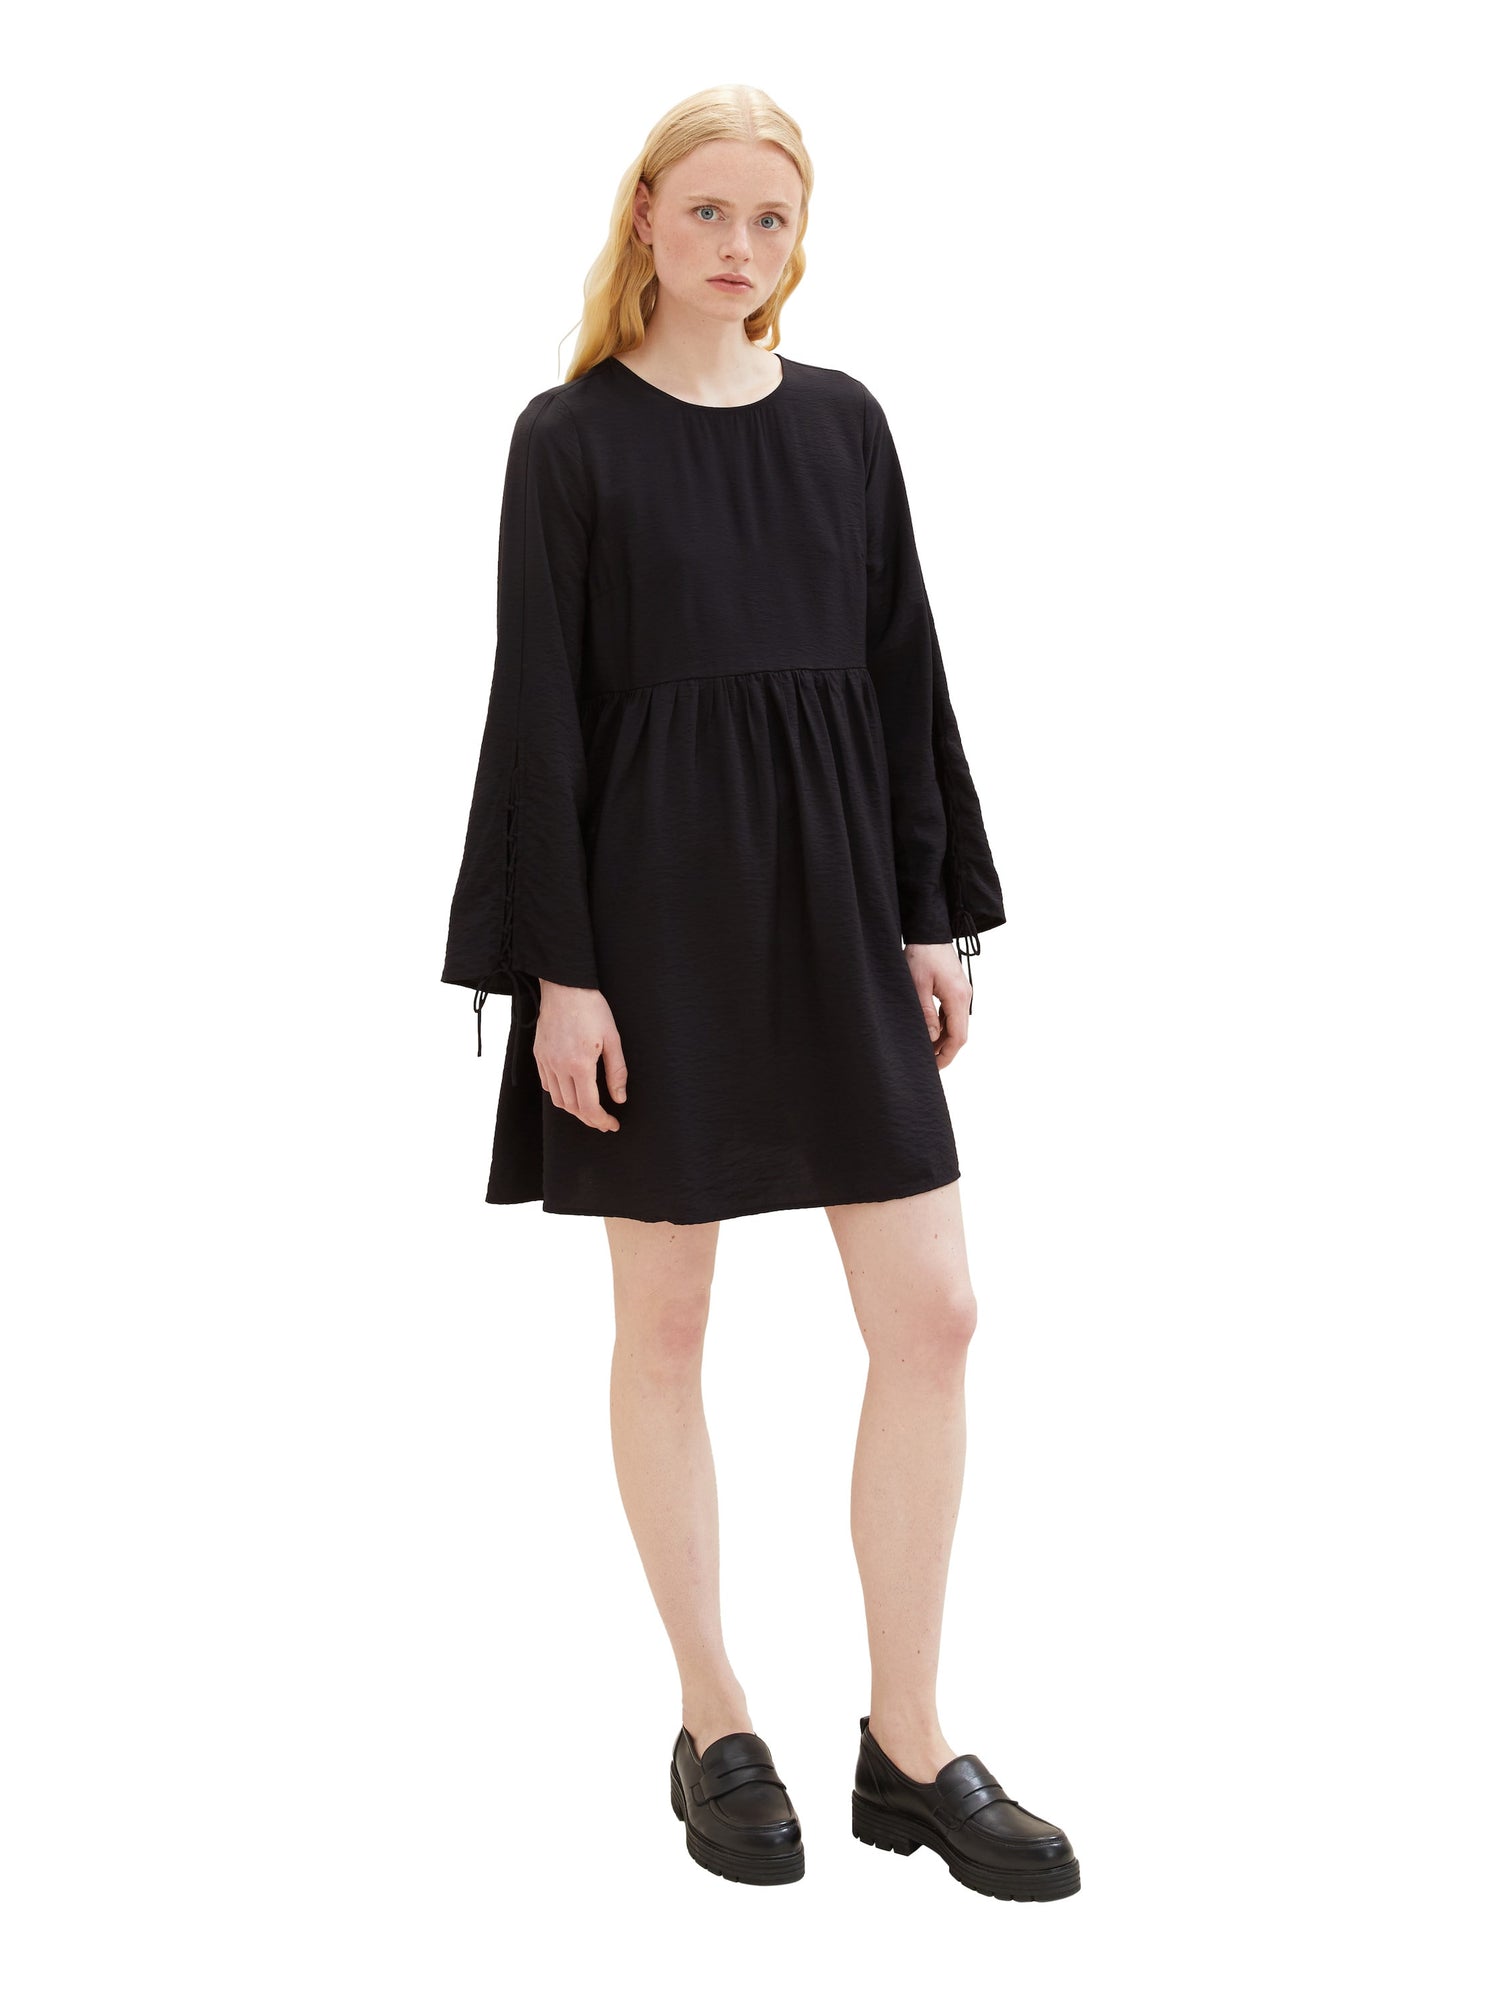 Loose Fit Short Dress With Adjustable Sleeves_1038142_14482_03